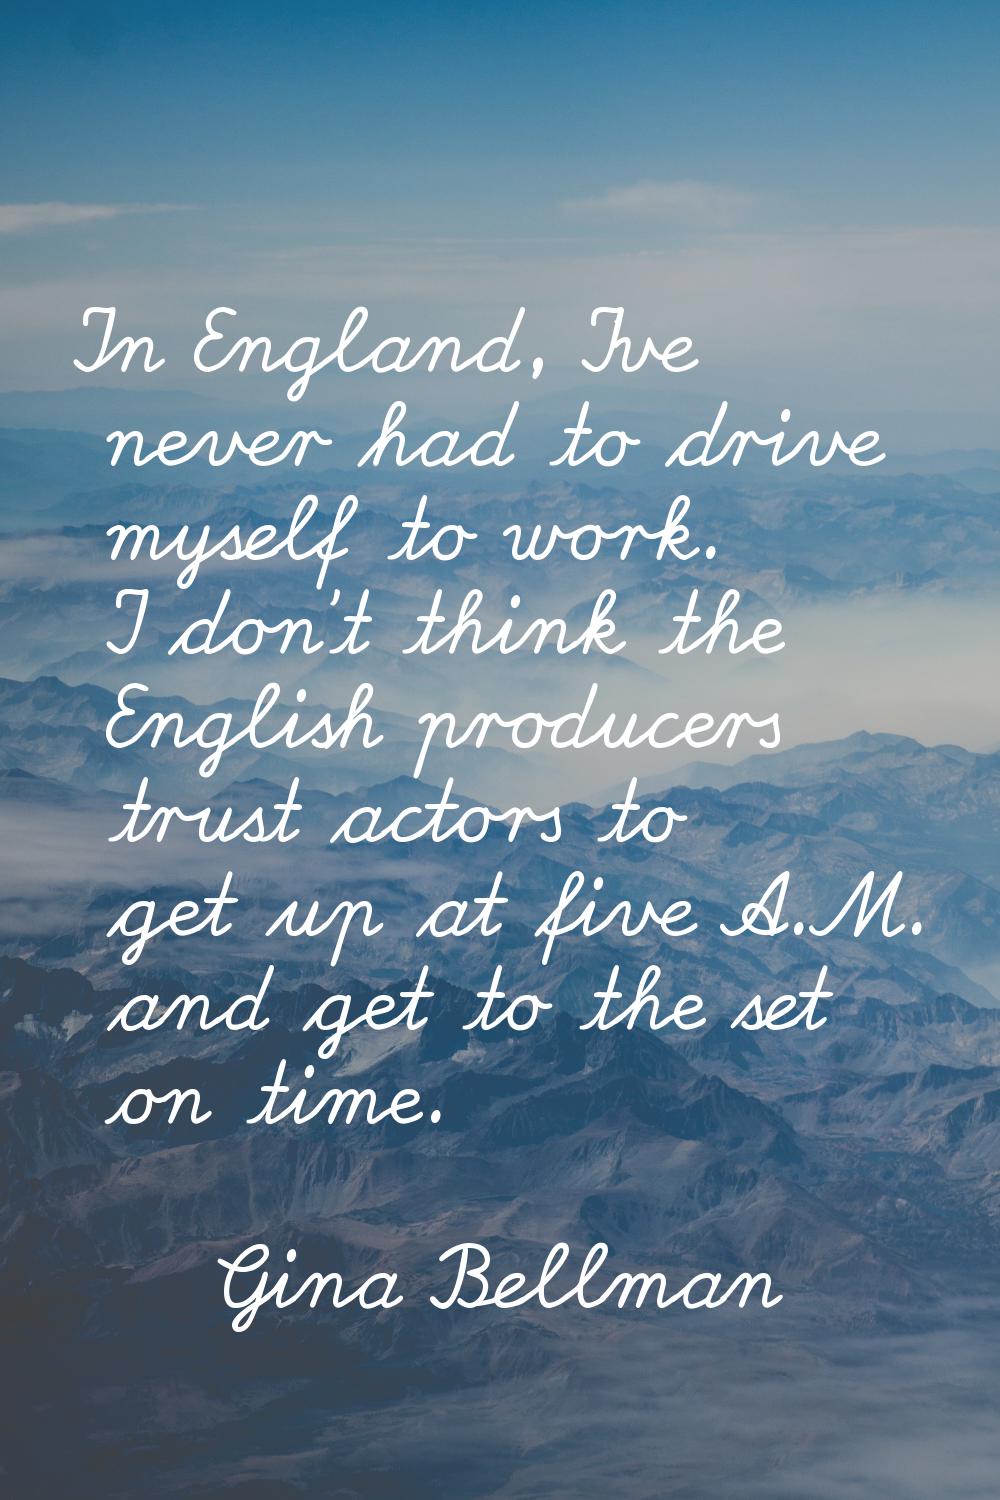 In England, I've never had to drive myself to work. I don't think the English producers trust actor